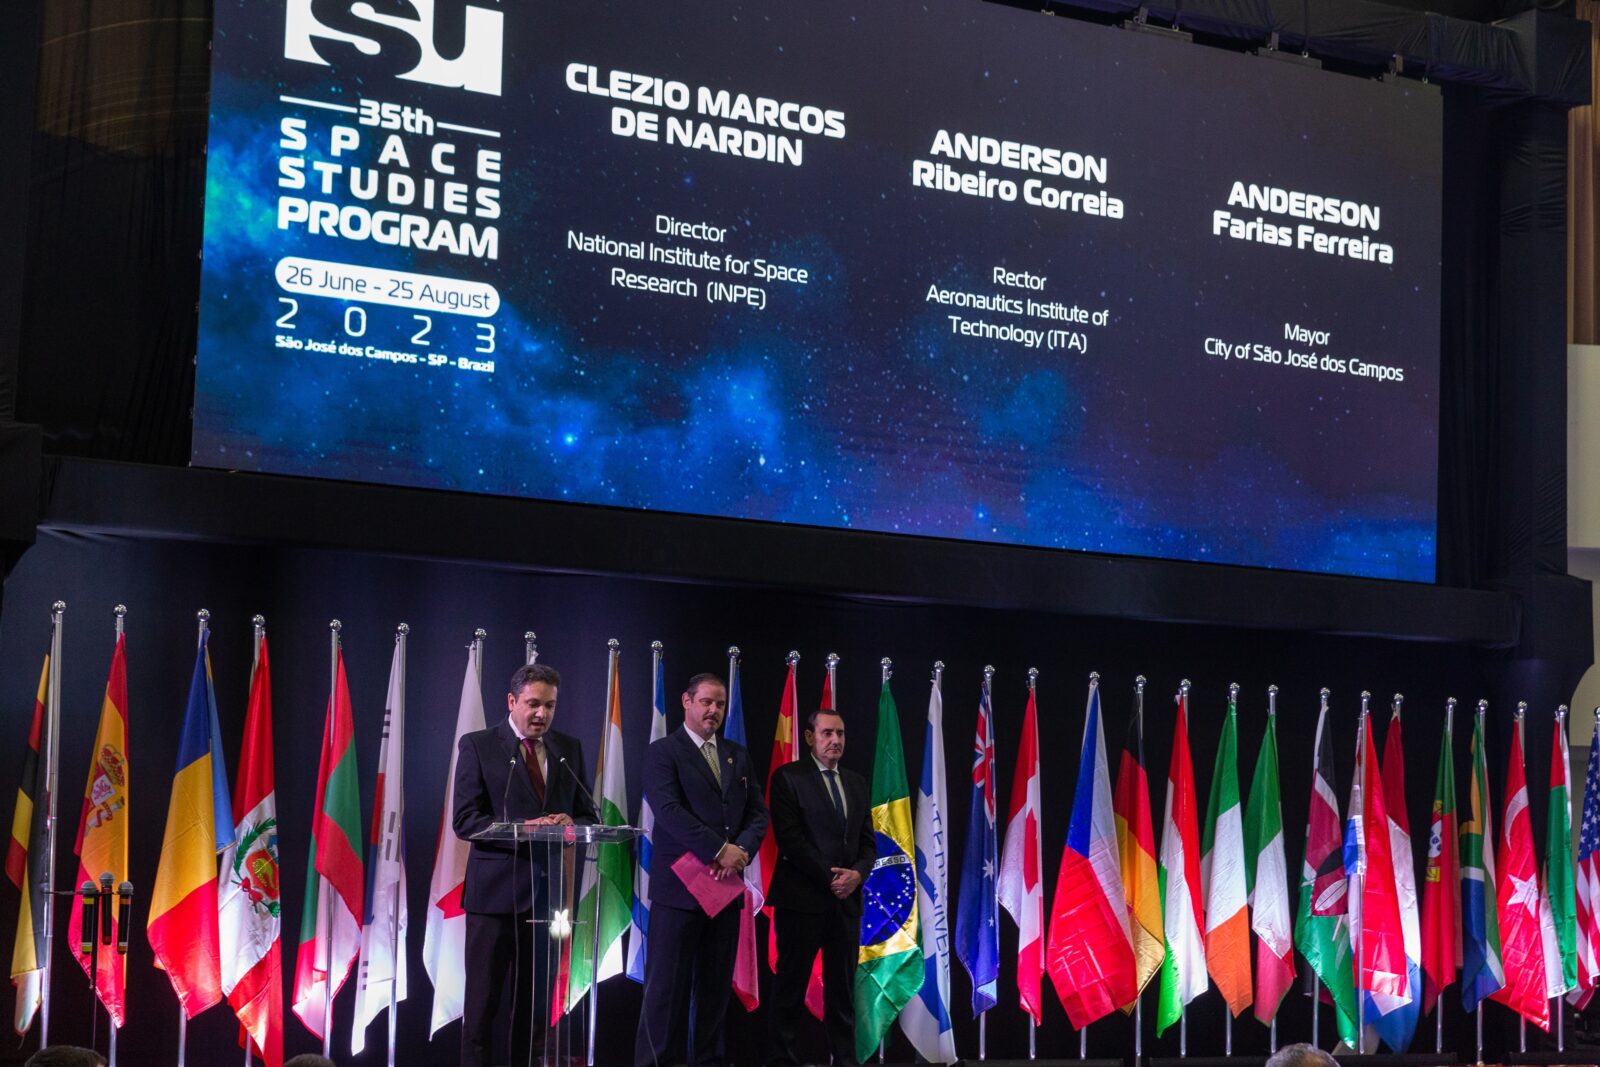 FAB participates in the official opening of the Space Studies Program 2023